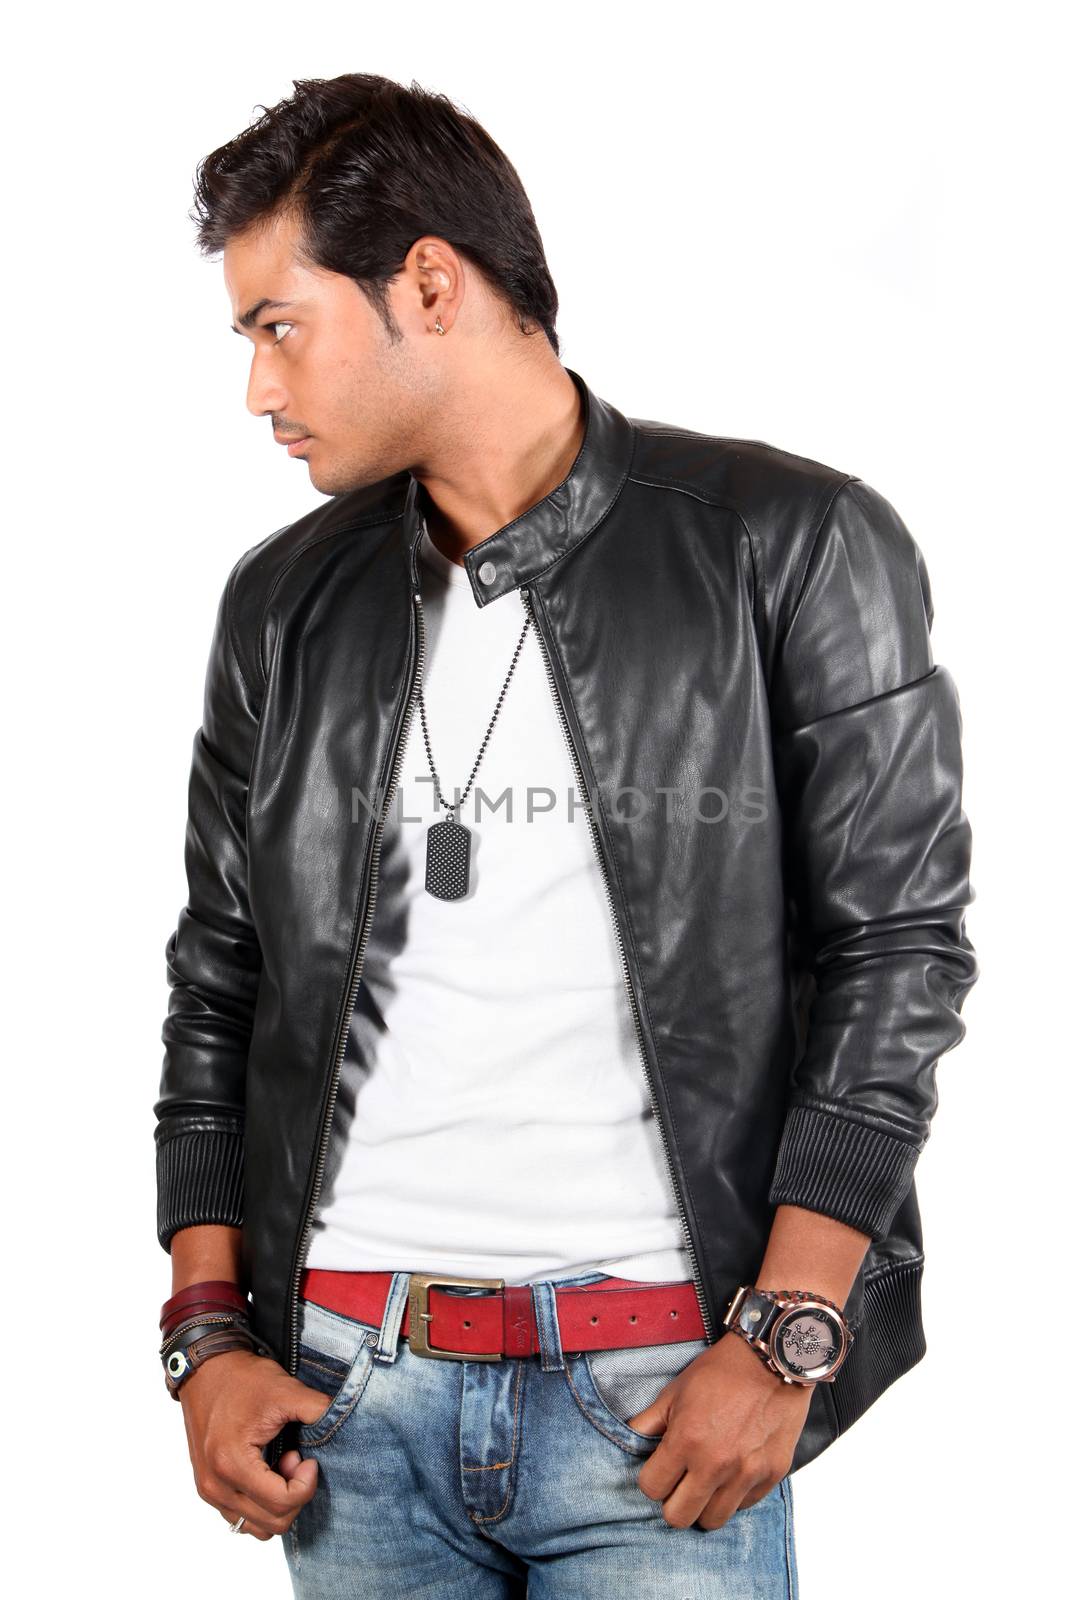 A young India male model posing in a leather jacket, on white studio background.